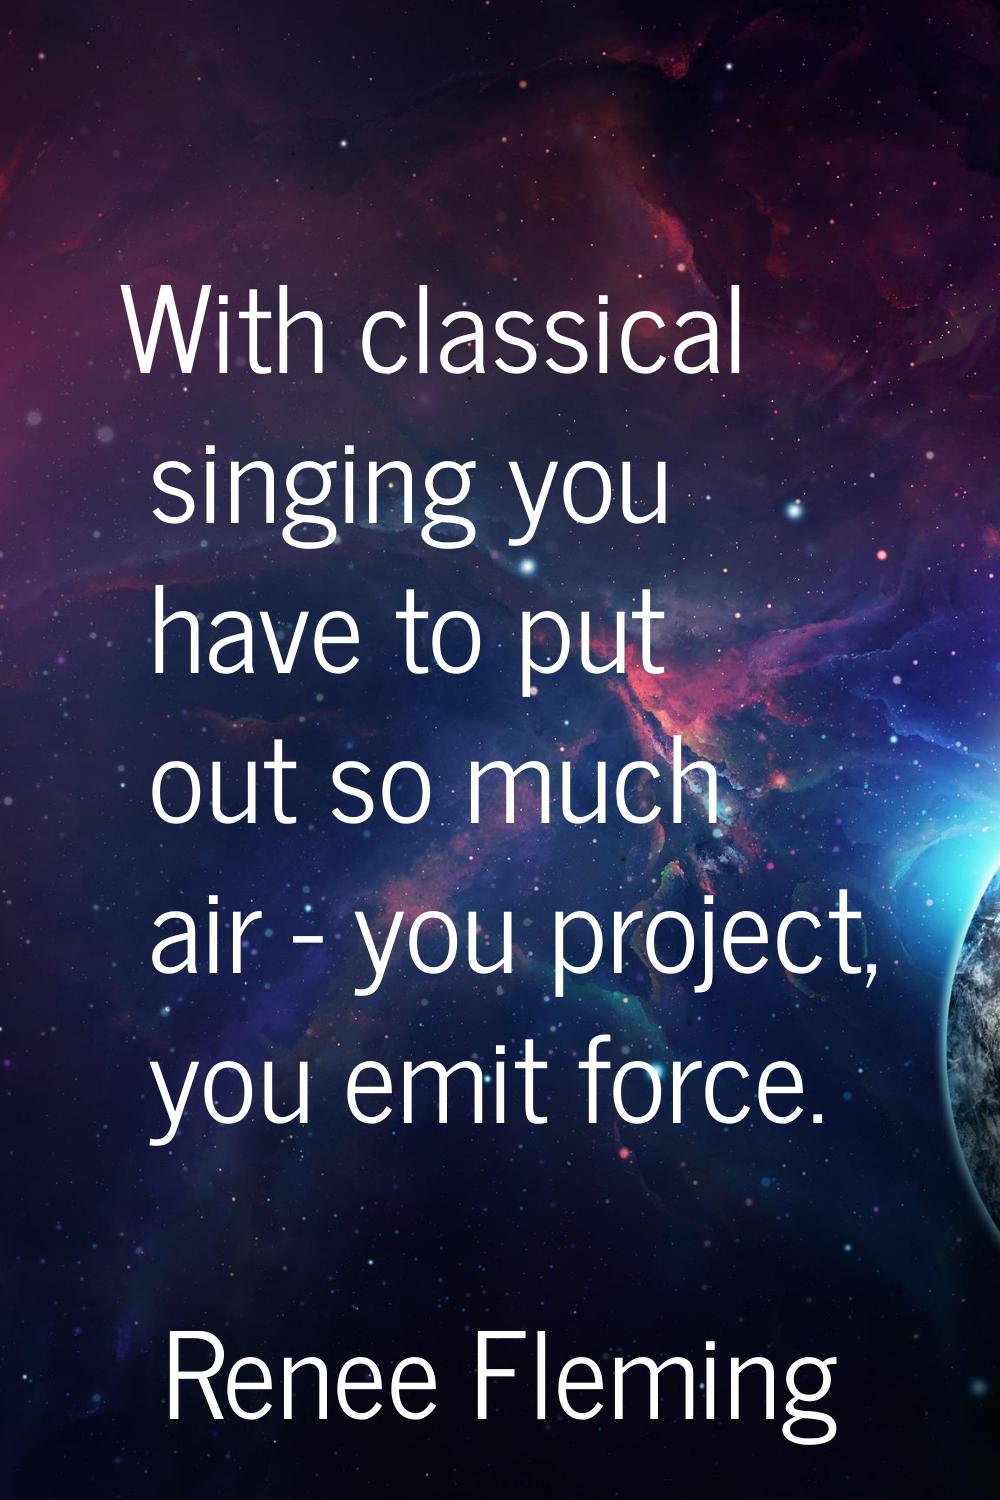 With classical singing you have to put out so much air - you project, you emit force.